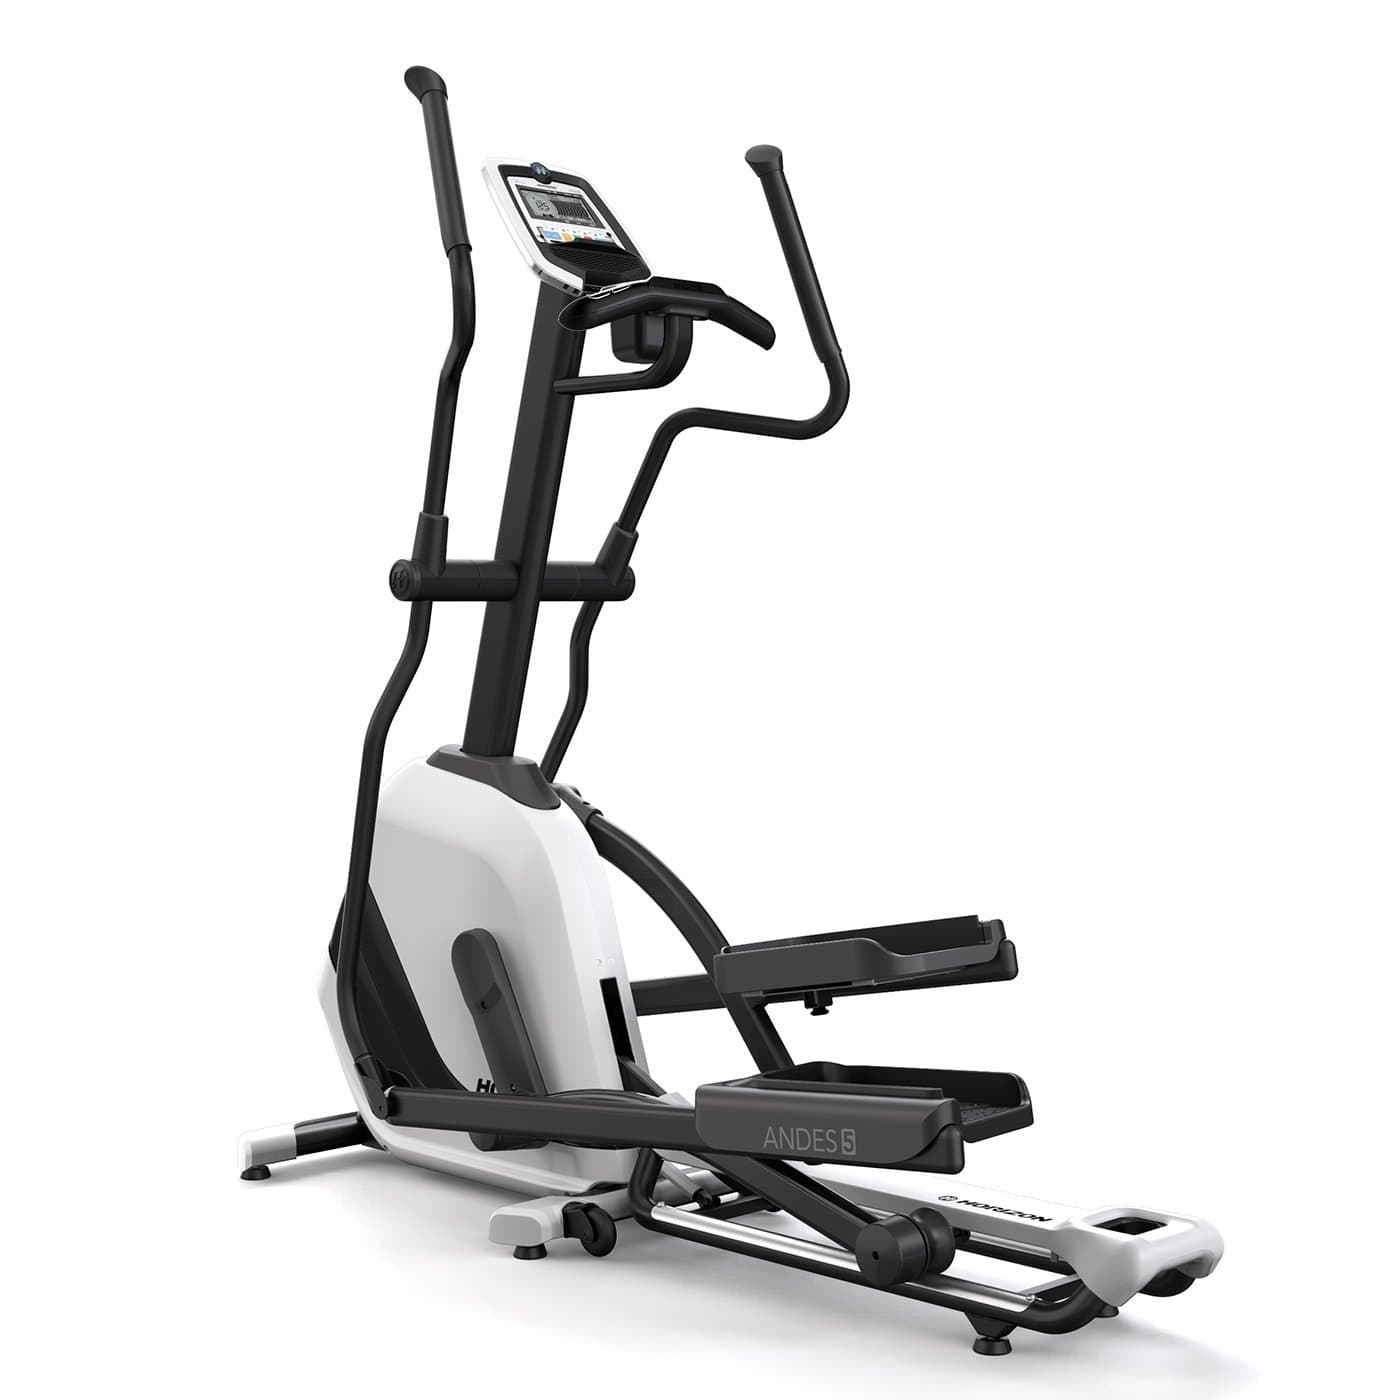 andes 6 cross trainer